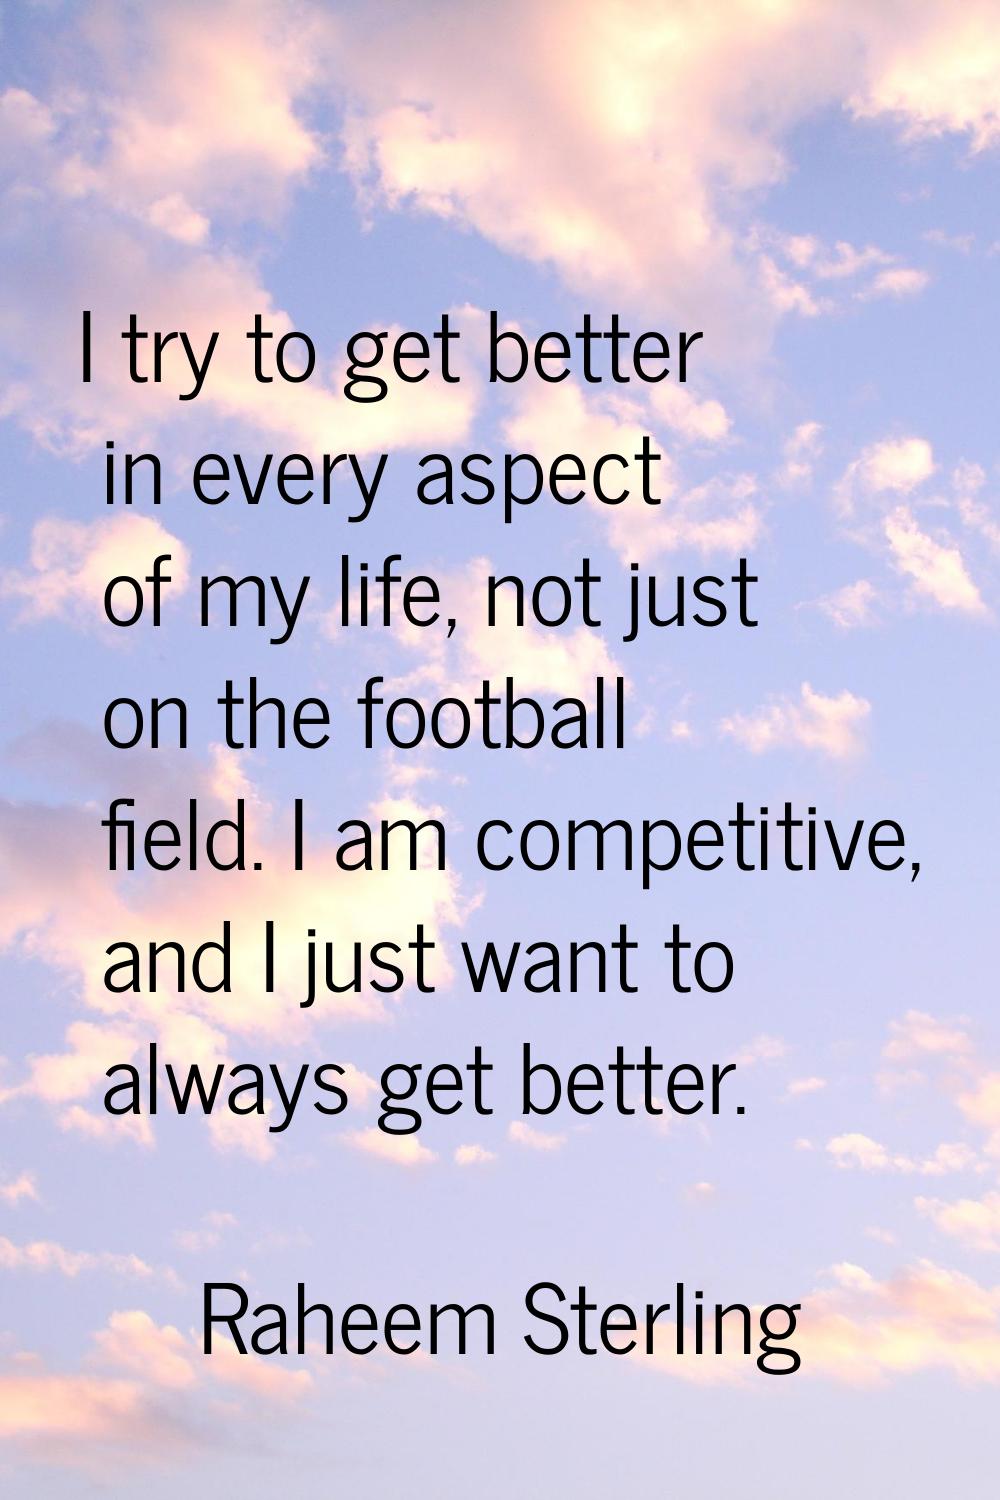 I try to get better in every aspect of my life, not just on the football field. I am competitive, a